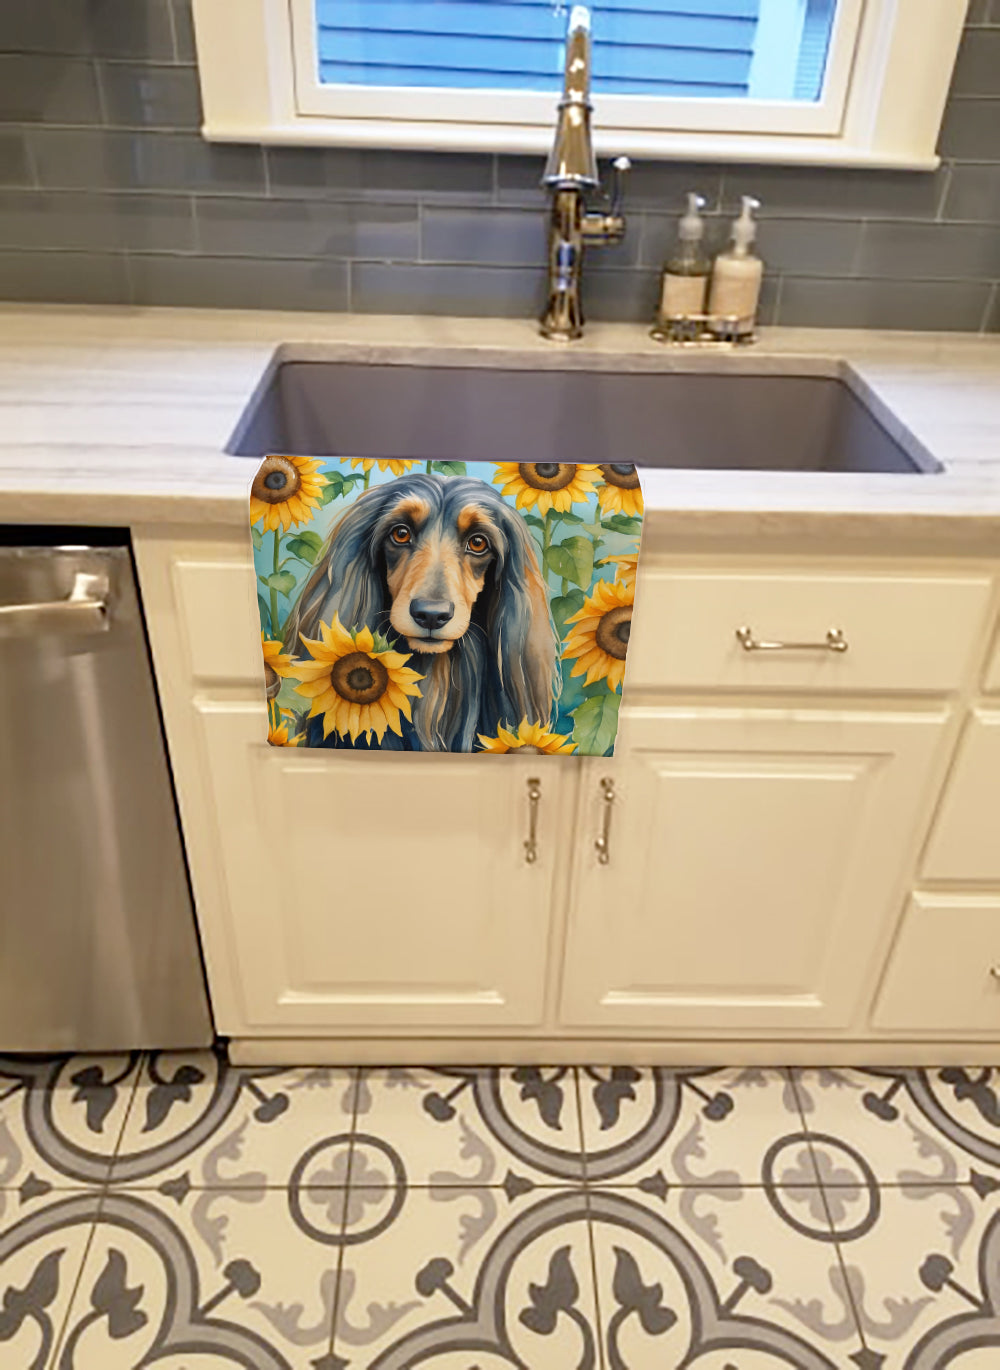 Buy this Afghan Hound in Sunflowers Kitchen Towel